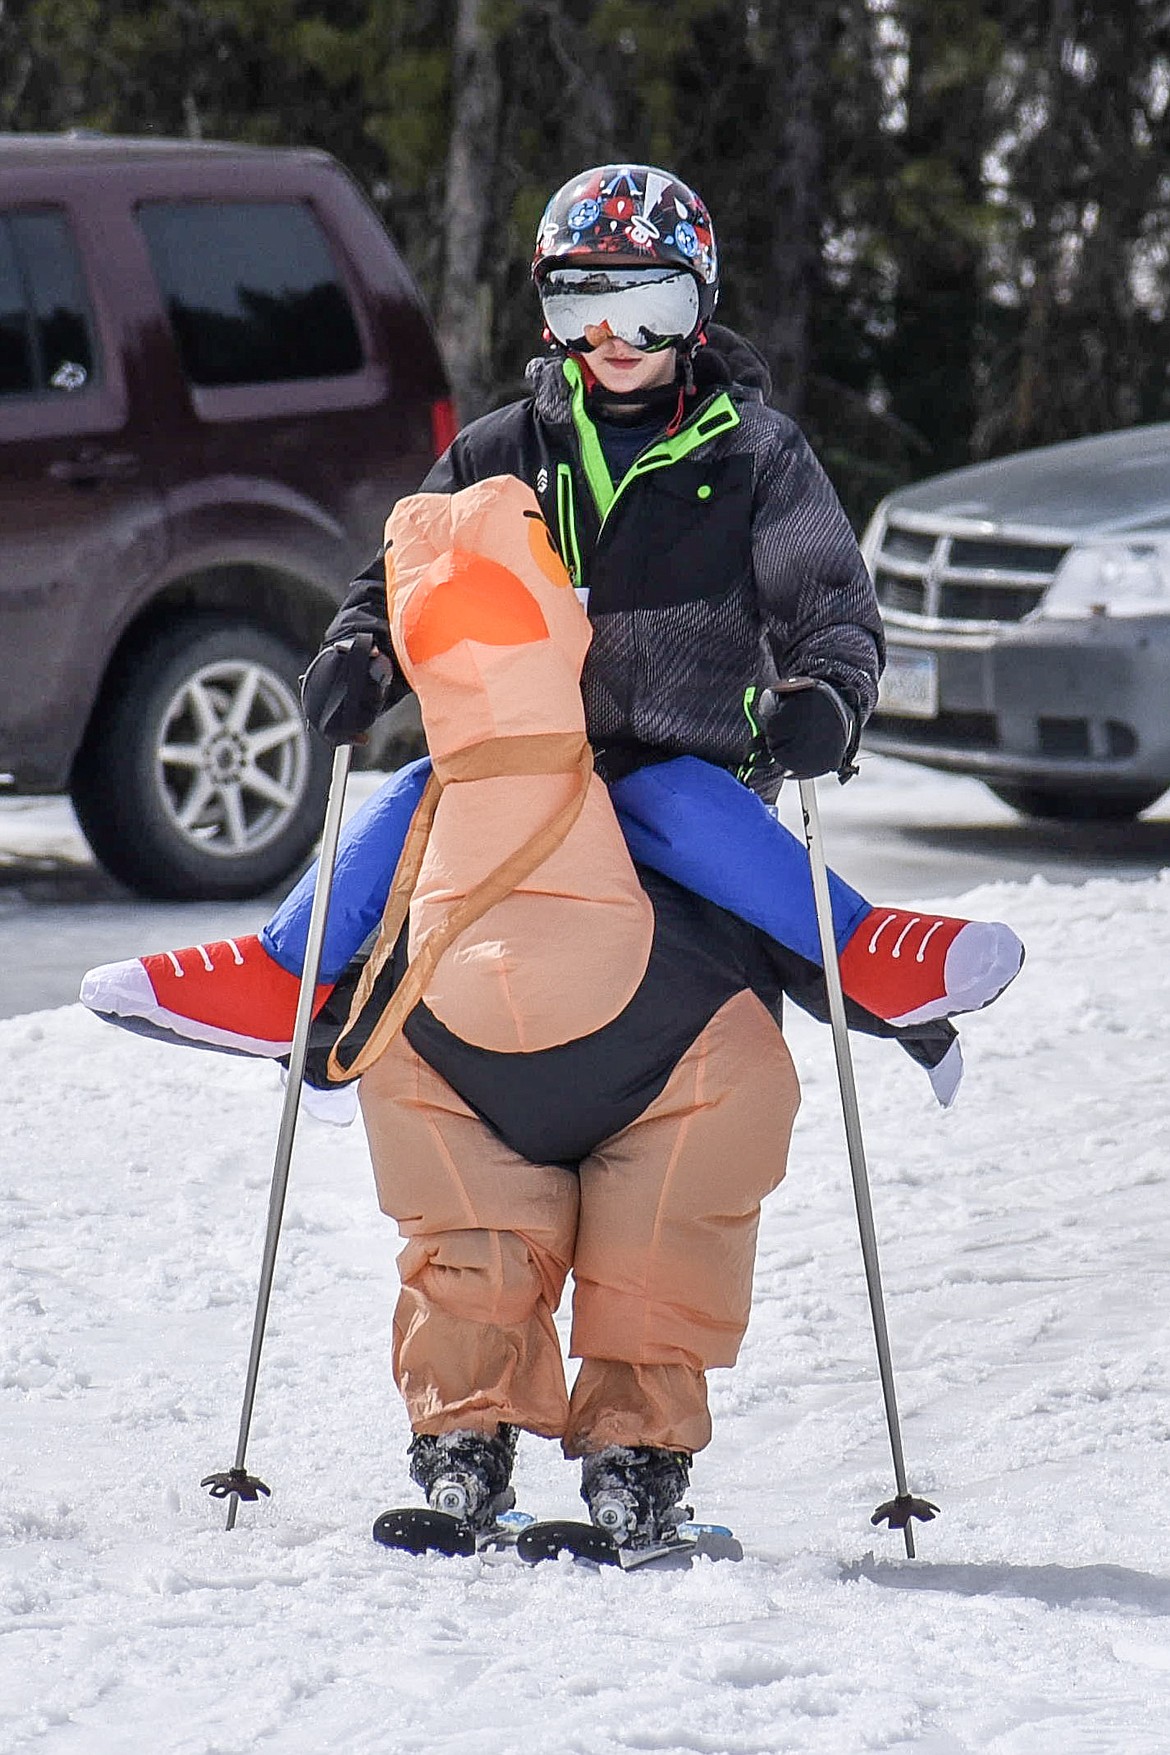 Carson Williams skied the mountain as an ostrich rider at Crazy Dayz. (Ben Kibbey/The Western News)